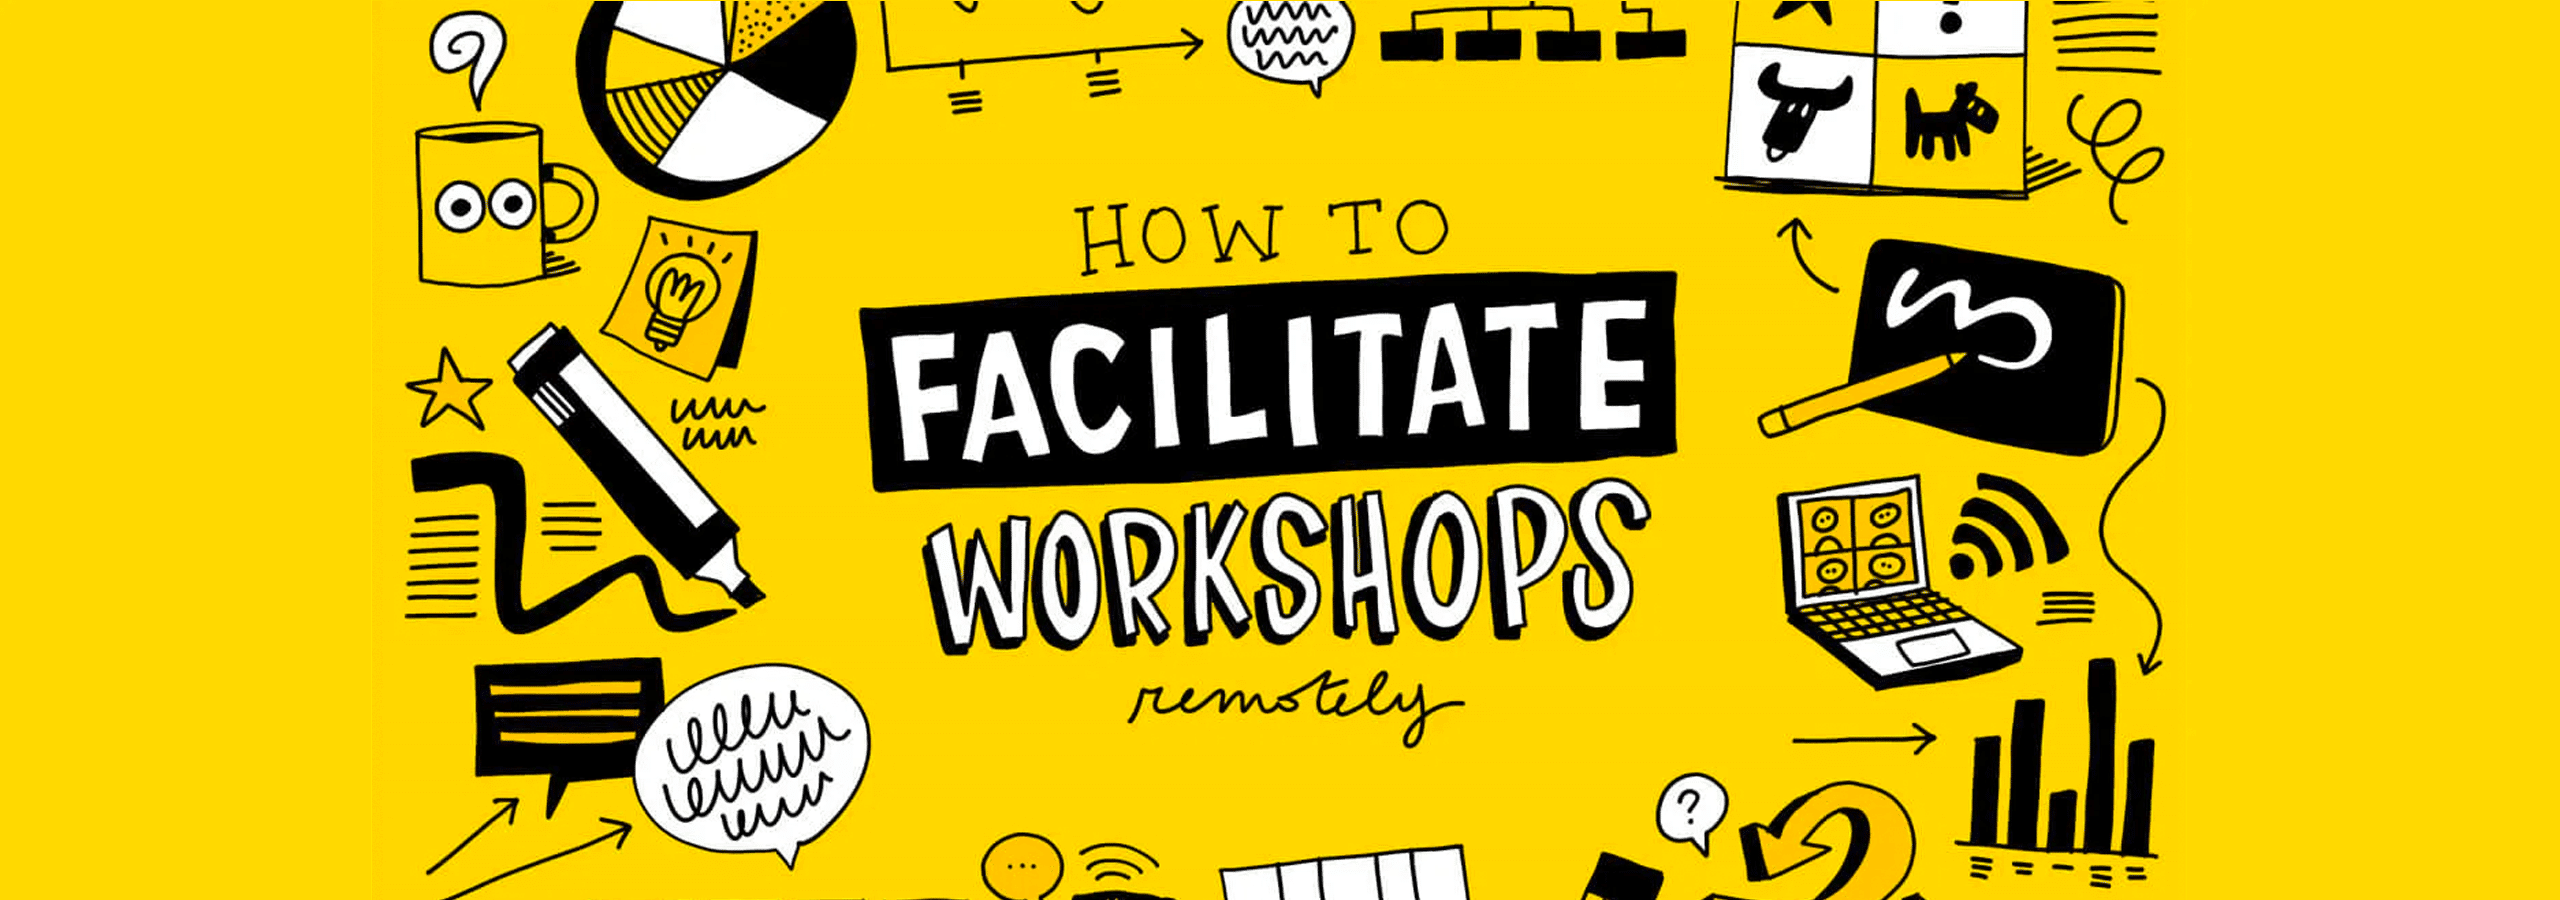 How to facilitate workshops remotely?